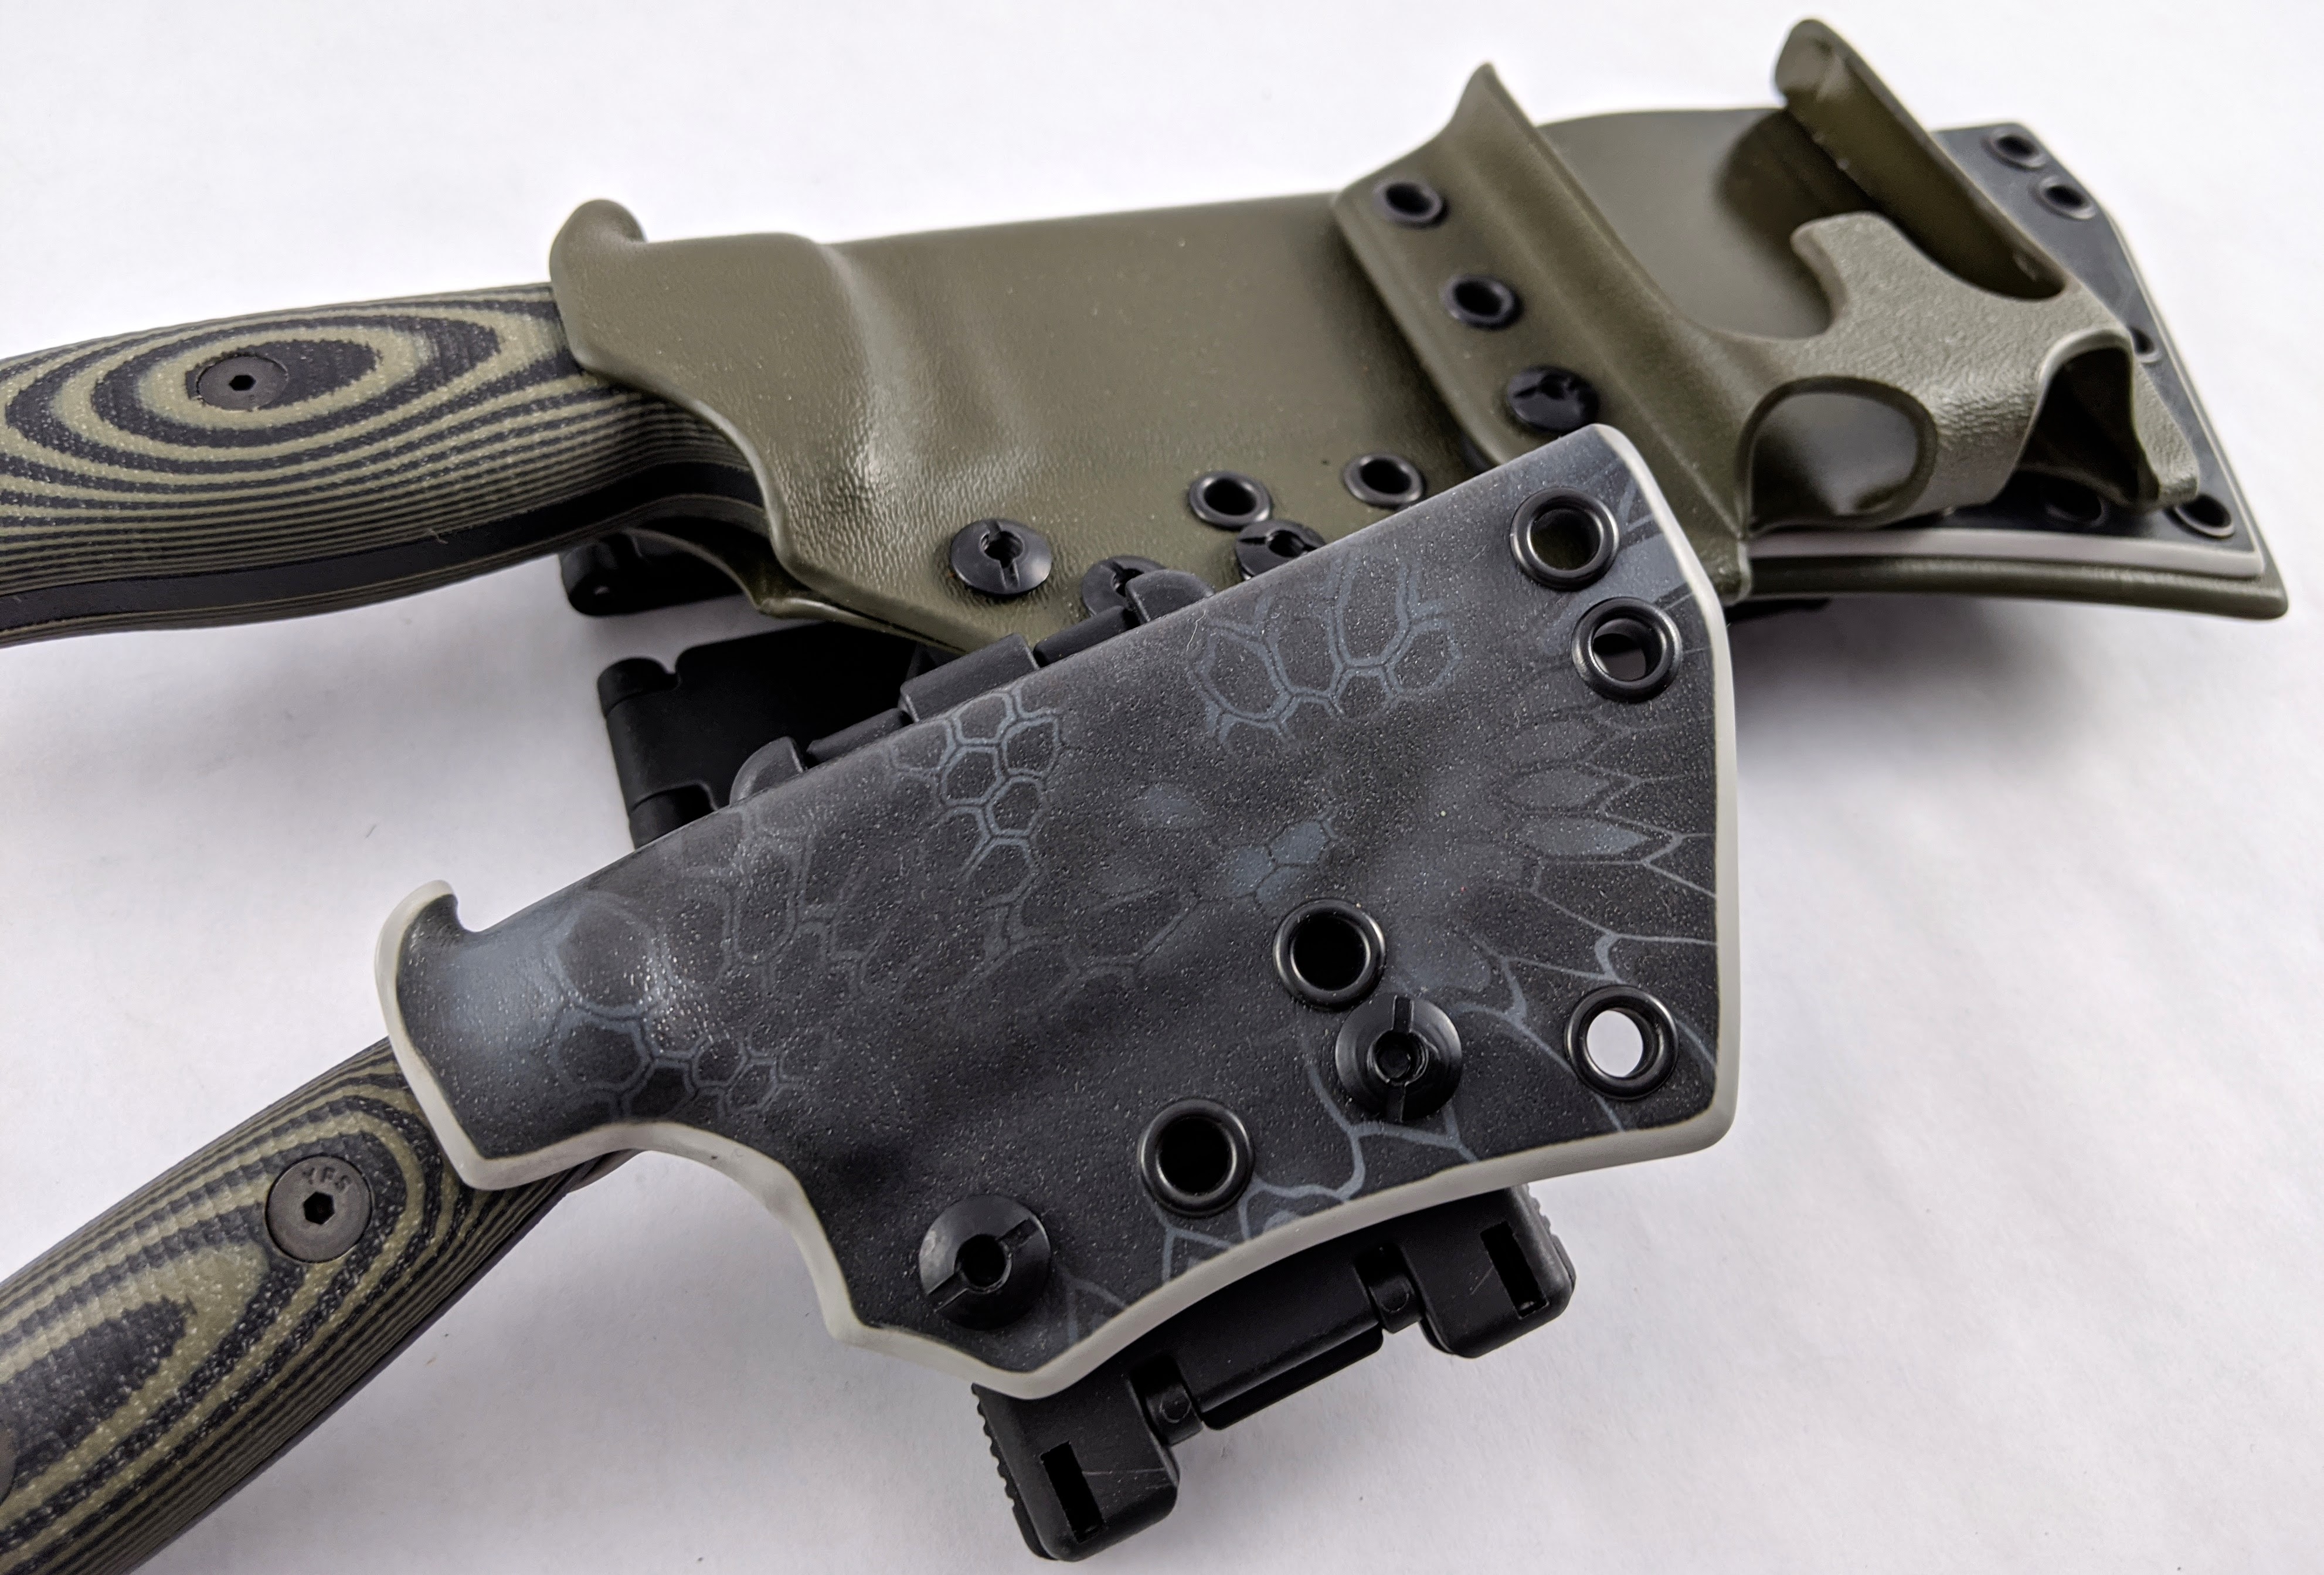 Kydex Knife Sheaths up to 11in Blade Length – CrankyTexan's Holsters & MFG.